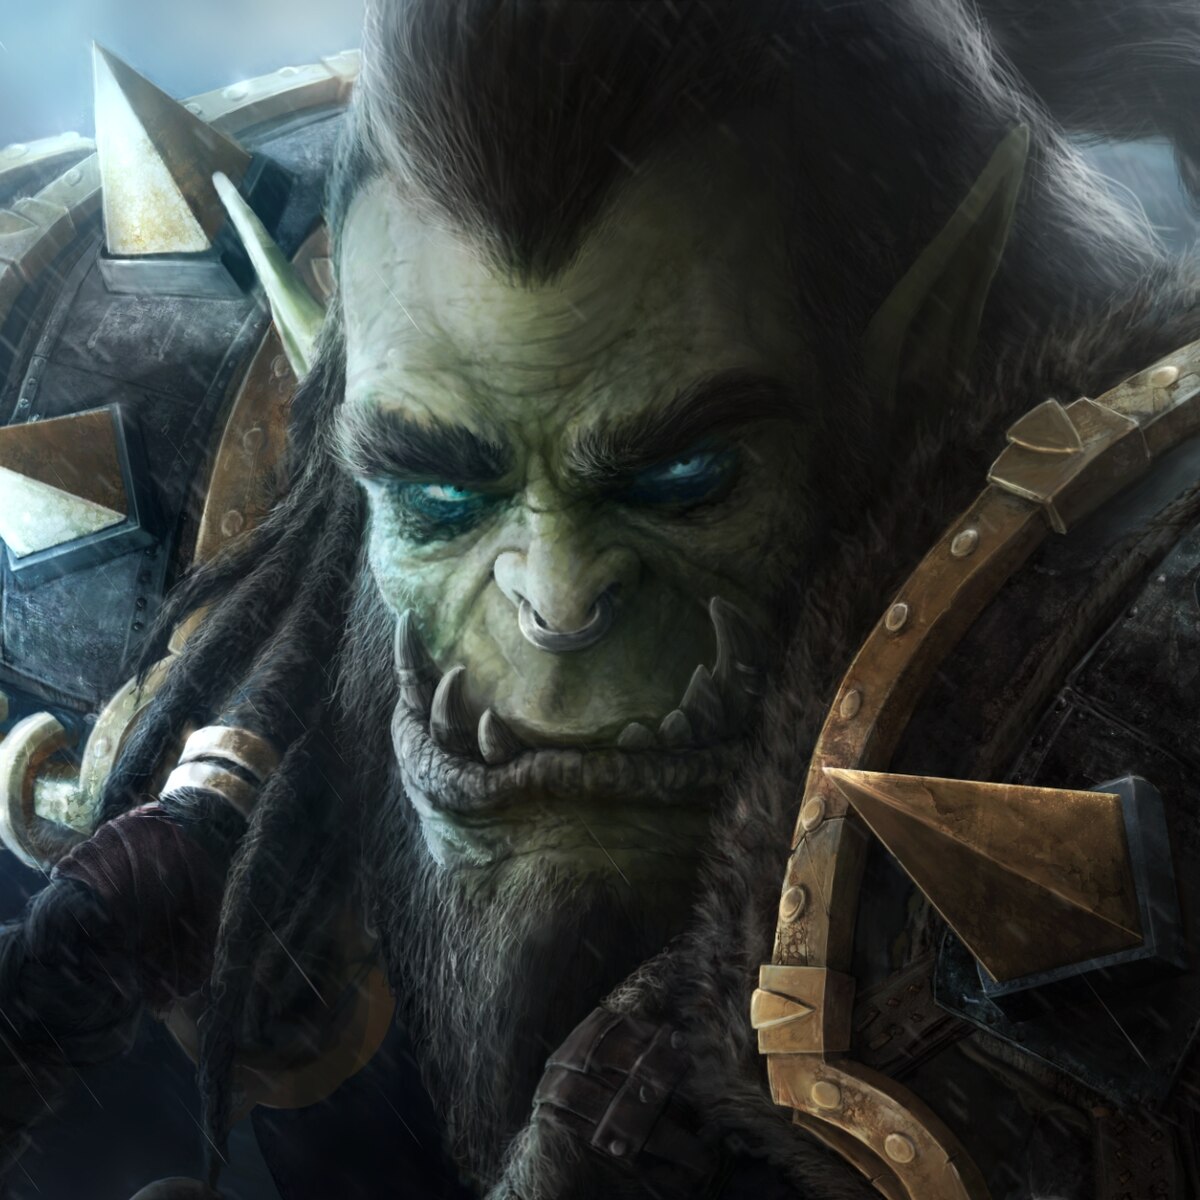 [1440p with music] World Of Warcraft - Thrall